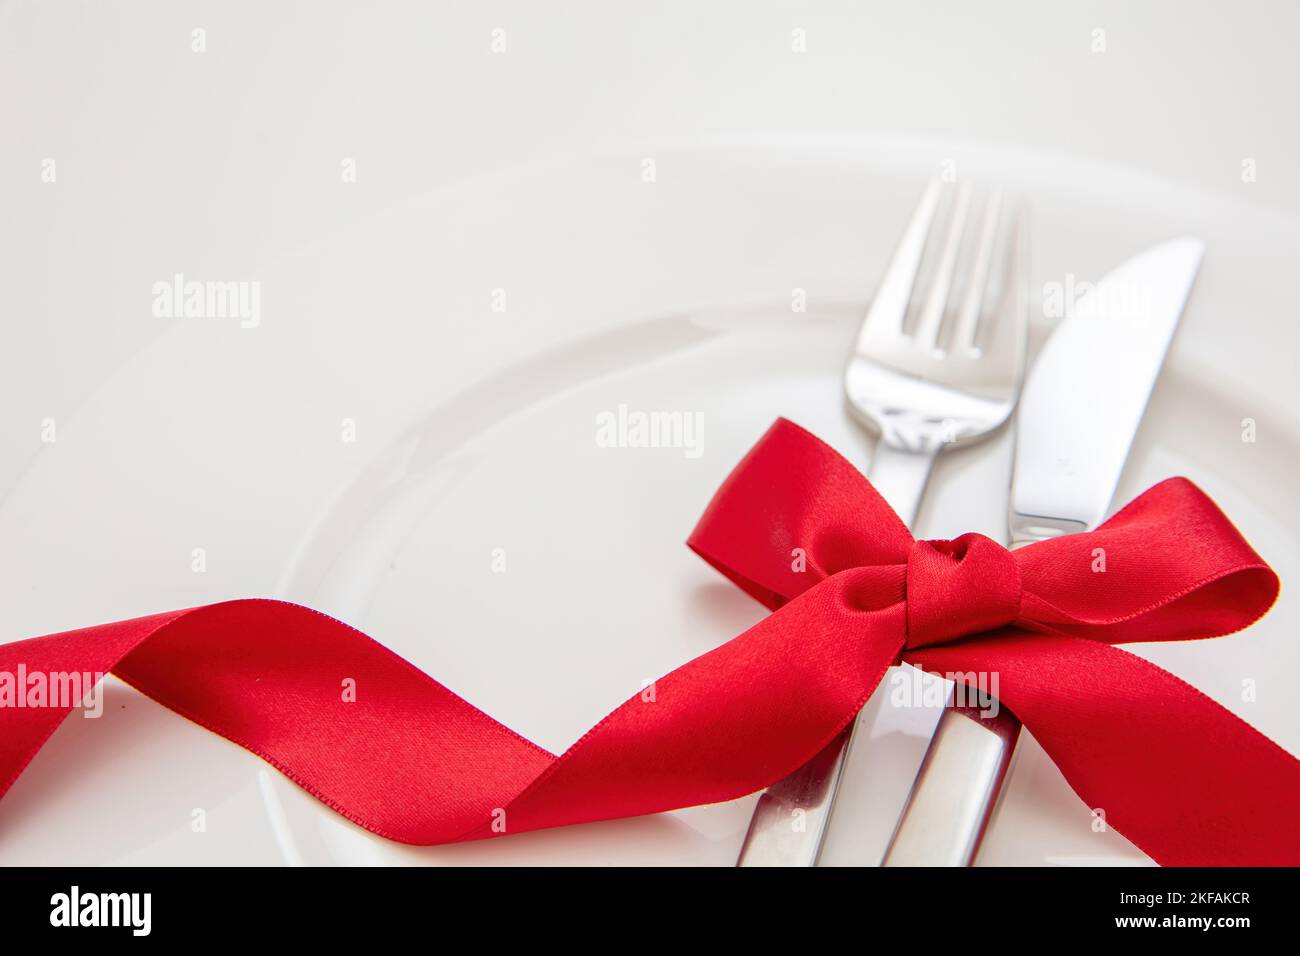 Holiday table setting close up view. Cutlery and red satin ribbon decoration on white dishes, Christmas, Valentines day celebration dinner Stock Photo